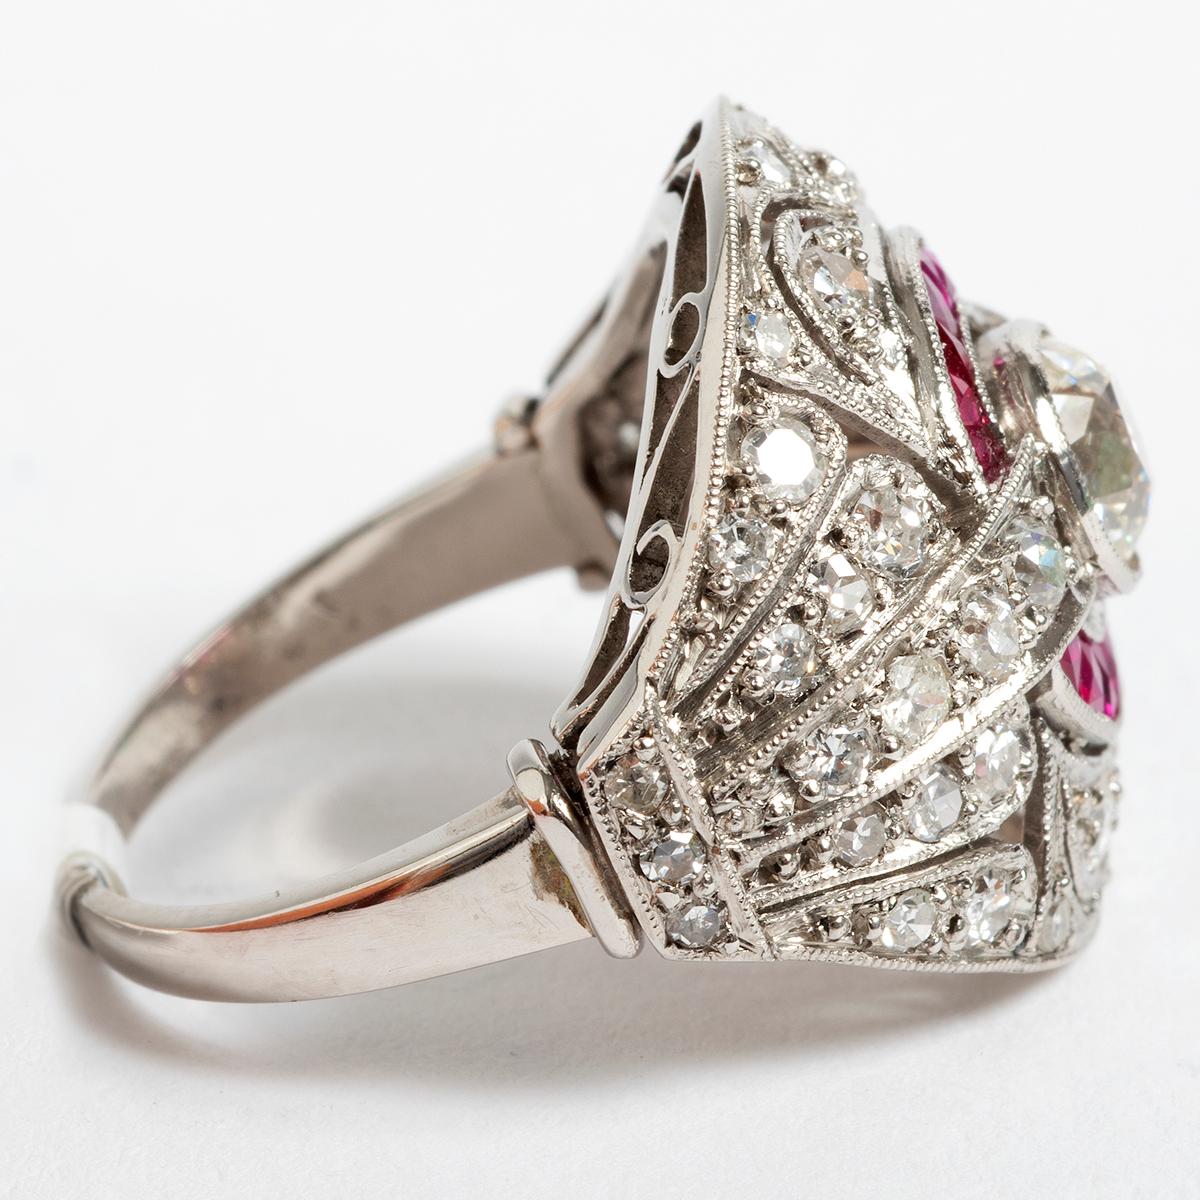 This 'art deco style' platinum from the 1900's diamond and ruby cluster ring comes in UK size L 1/2 / US size 6. A beautifully designed and vibrant piece.